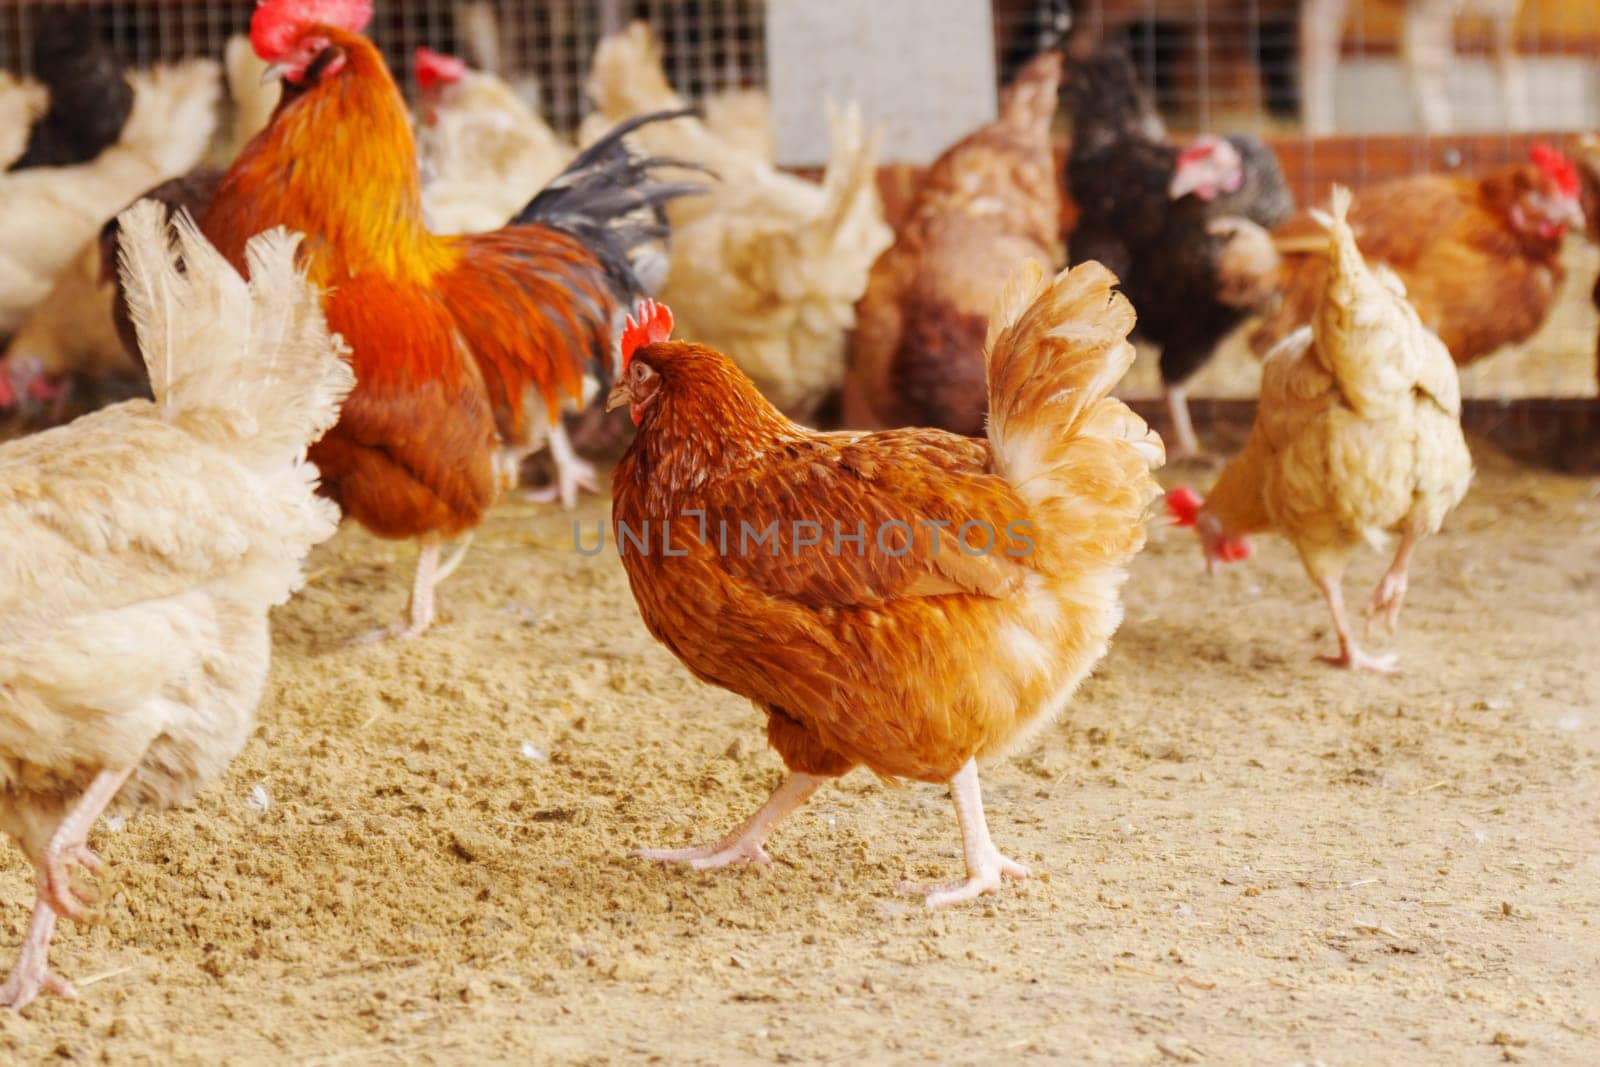 Group of chickens, their feathers ruffling in the wind as they survey their surroundings and peck at the ground.